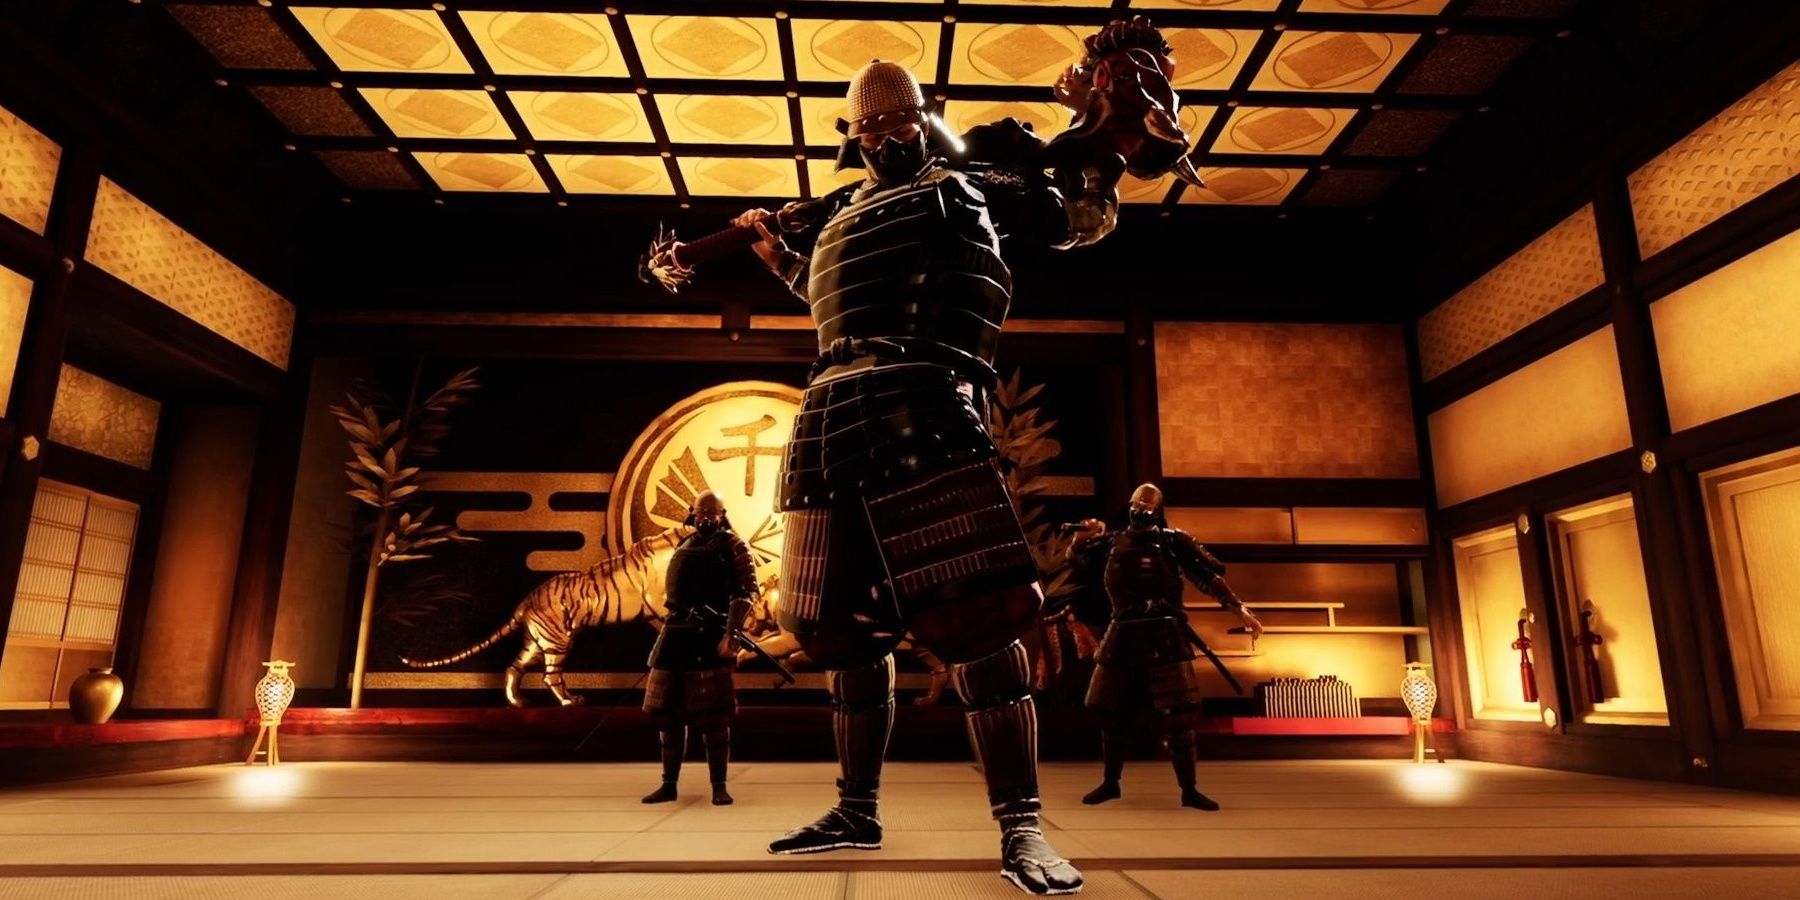 A Giant Warrior with an equally massive weapon is flanked by smaller men preparing to fight Ryoma.